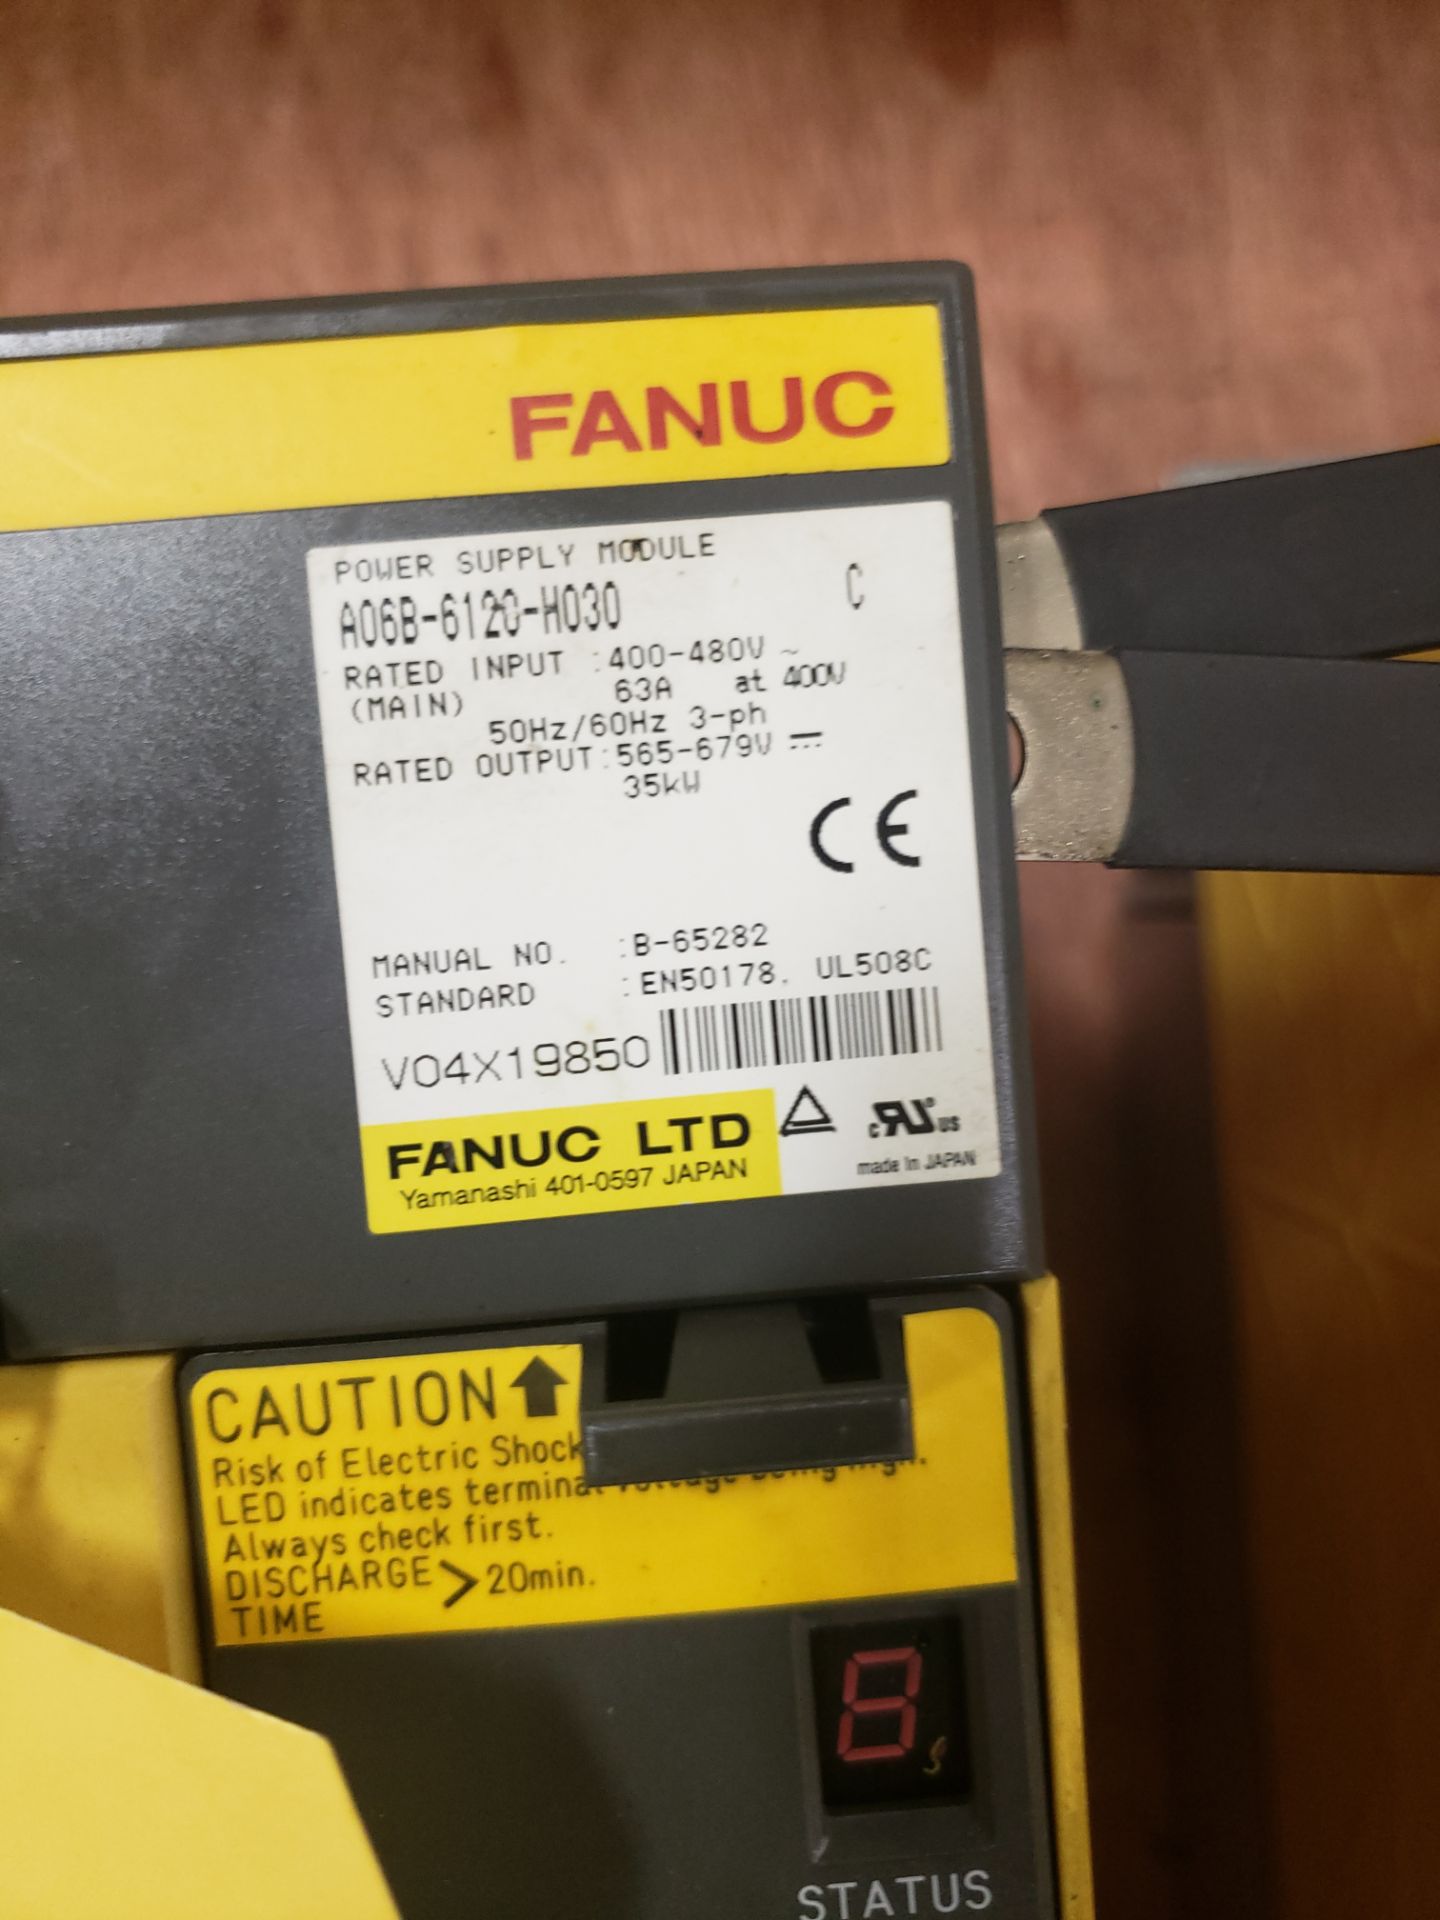 FANUC POWER SUPPLY MODULE MODEL-A06B-6120-H030 480V(LOCATED AT: 131 W. HARVEST STREET, BLUFFTON, - Image 2 of 2